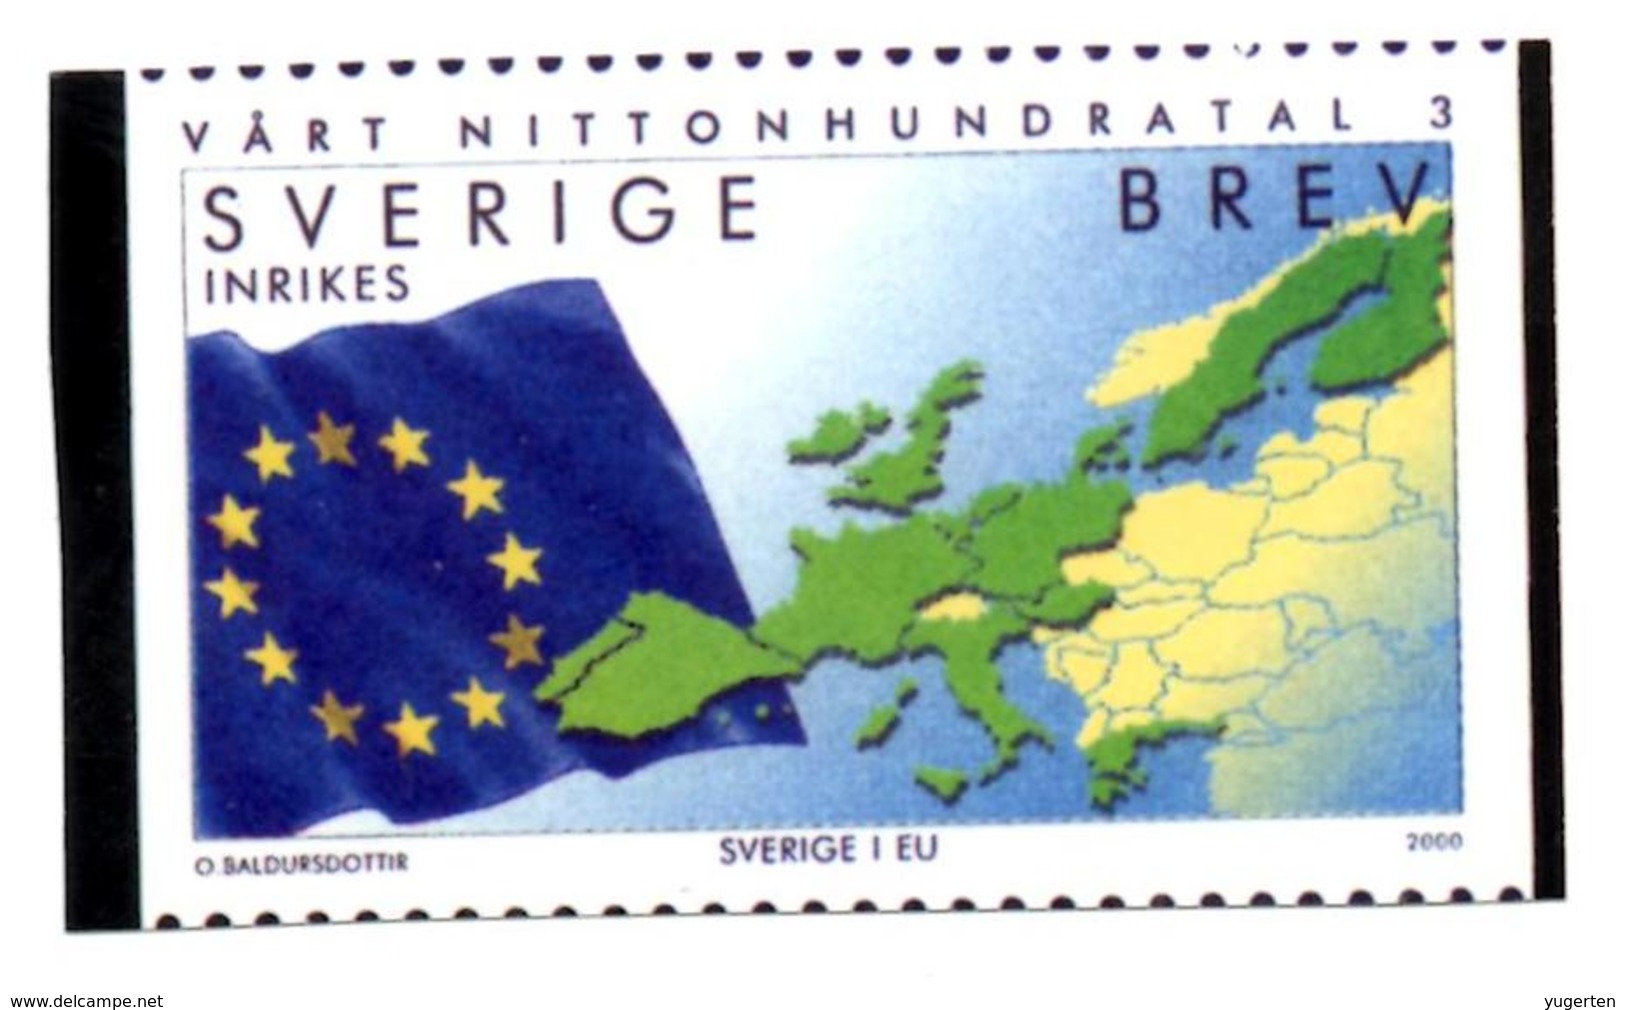 SWEDEN SUEDE 2000 - BREV Official Photo Officielle - Europe Europa Map Maps Flag Flags Flaggs Flaggen - 2000